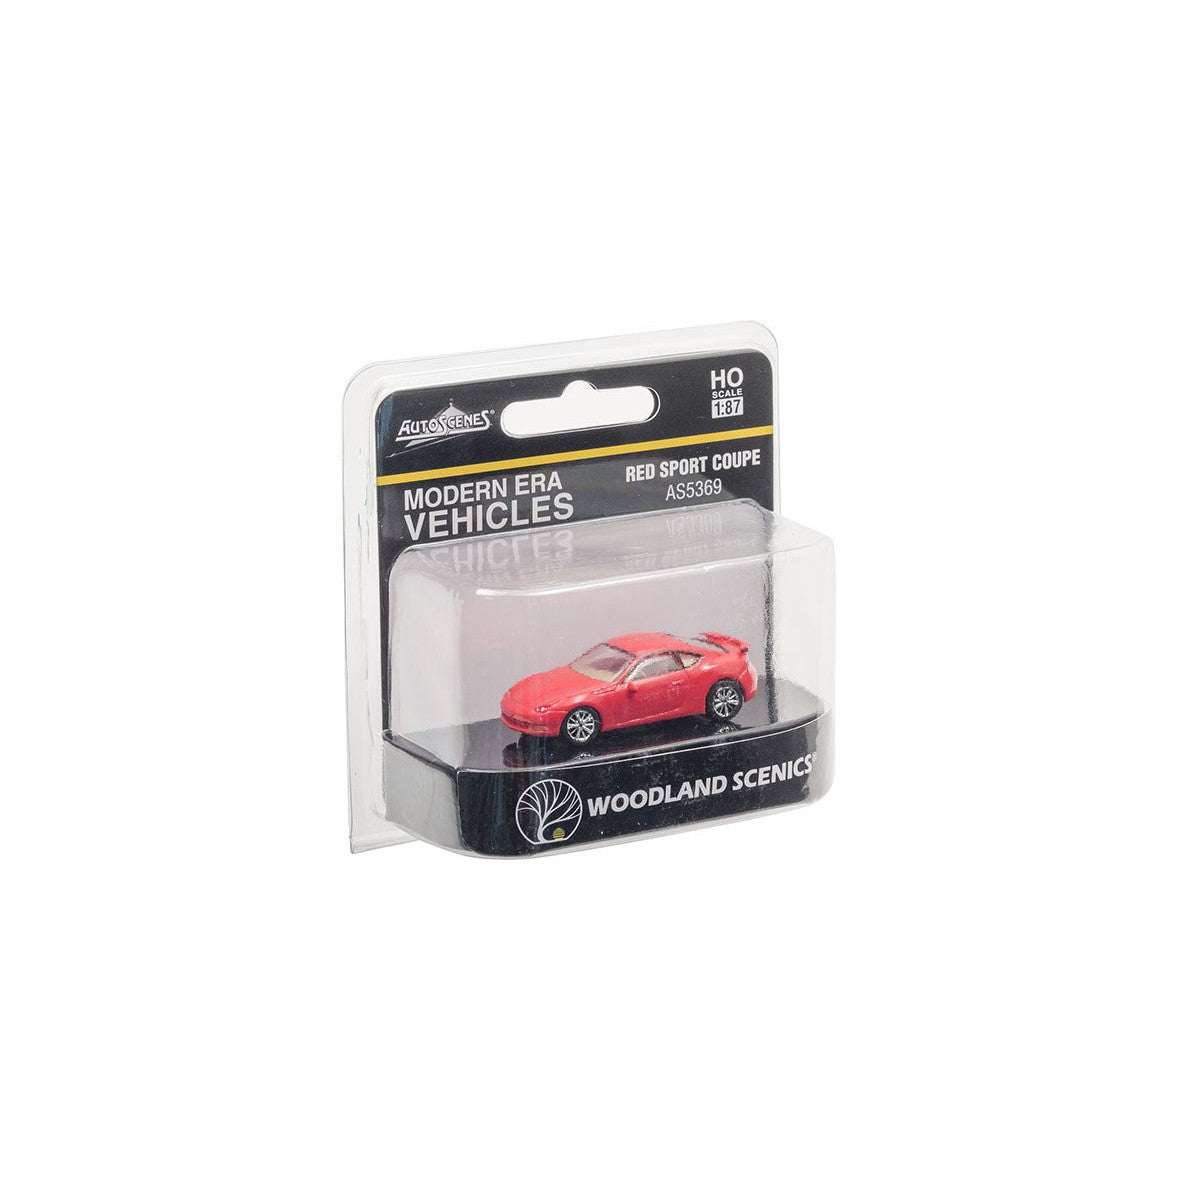 Woodland Scenics HO Scale Scale Red Sport Coupe Modern Era Vehicles